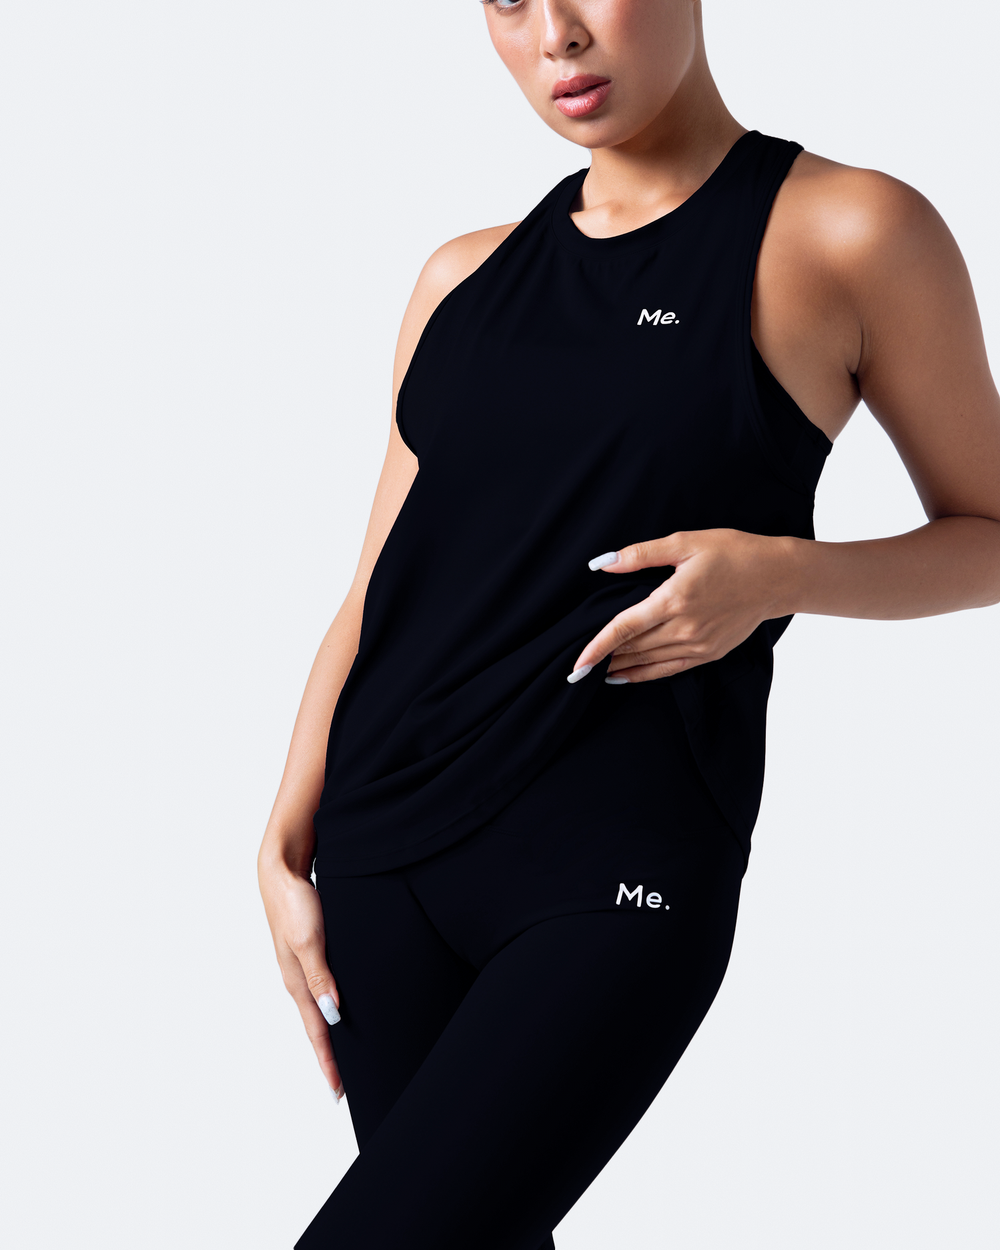 BetterMe High Waisted Leggings and Cropped Long Sleeve Top Set in Black | 2  pieces Women's Slimming Effect Sport Set